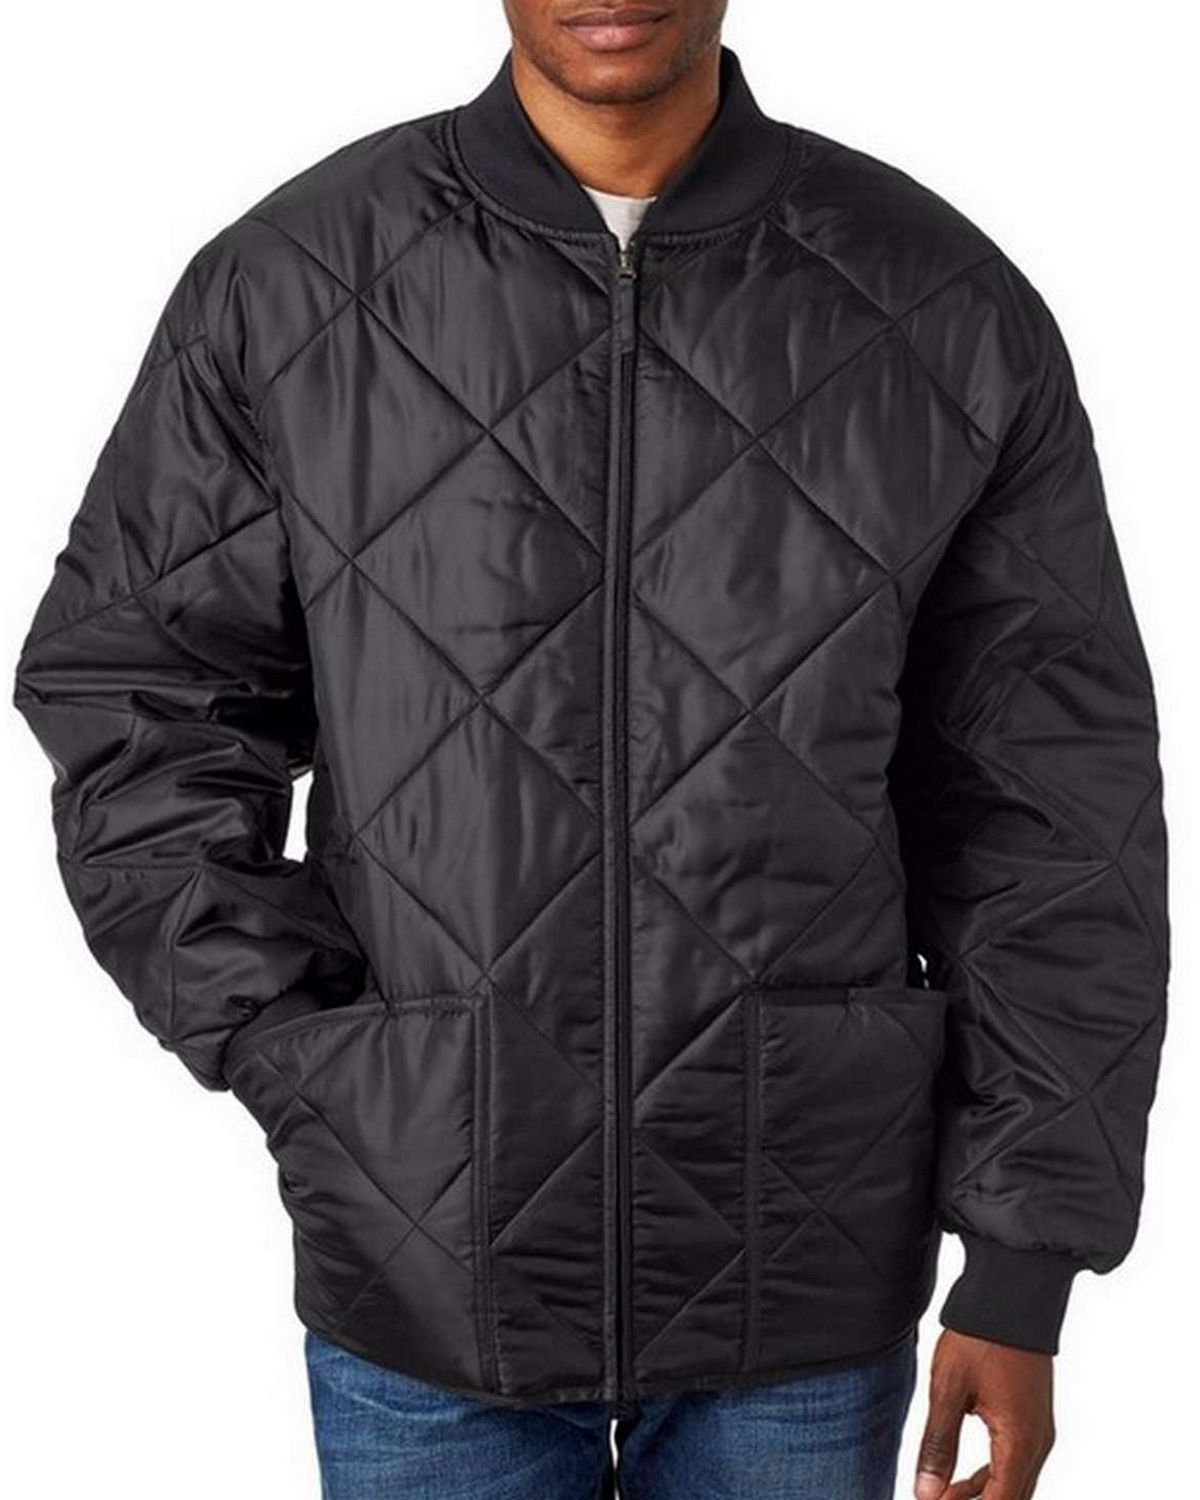 Ultraclub 8467 Adult Puffy Workwear Jacket with Quilted Lining